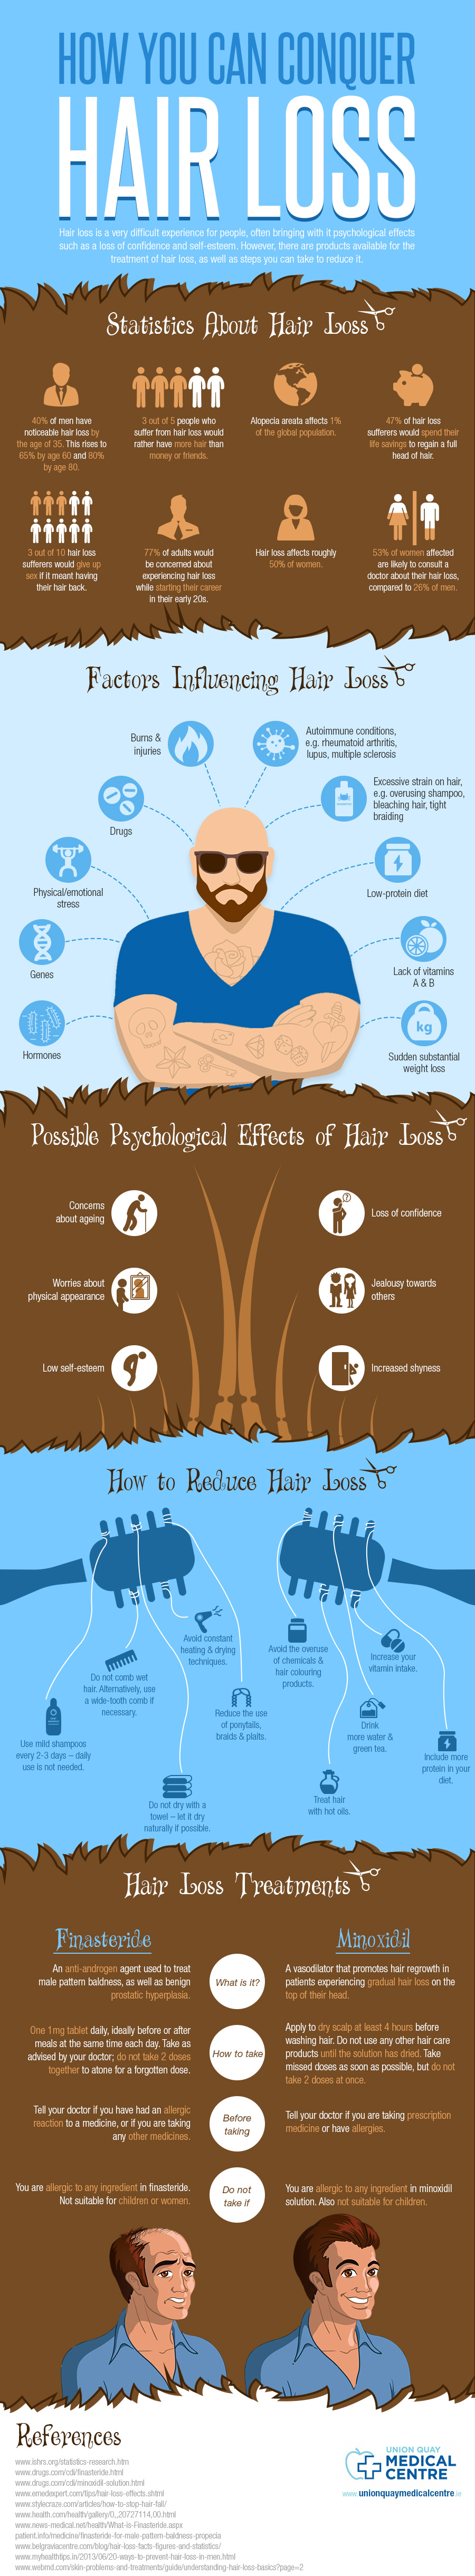 How You Can Conquer Hair Loss 